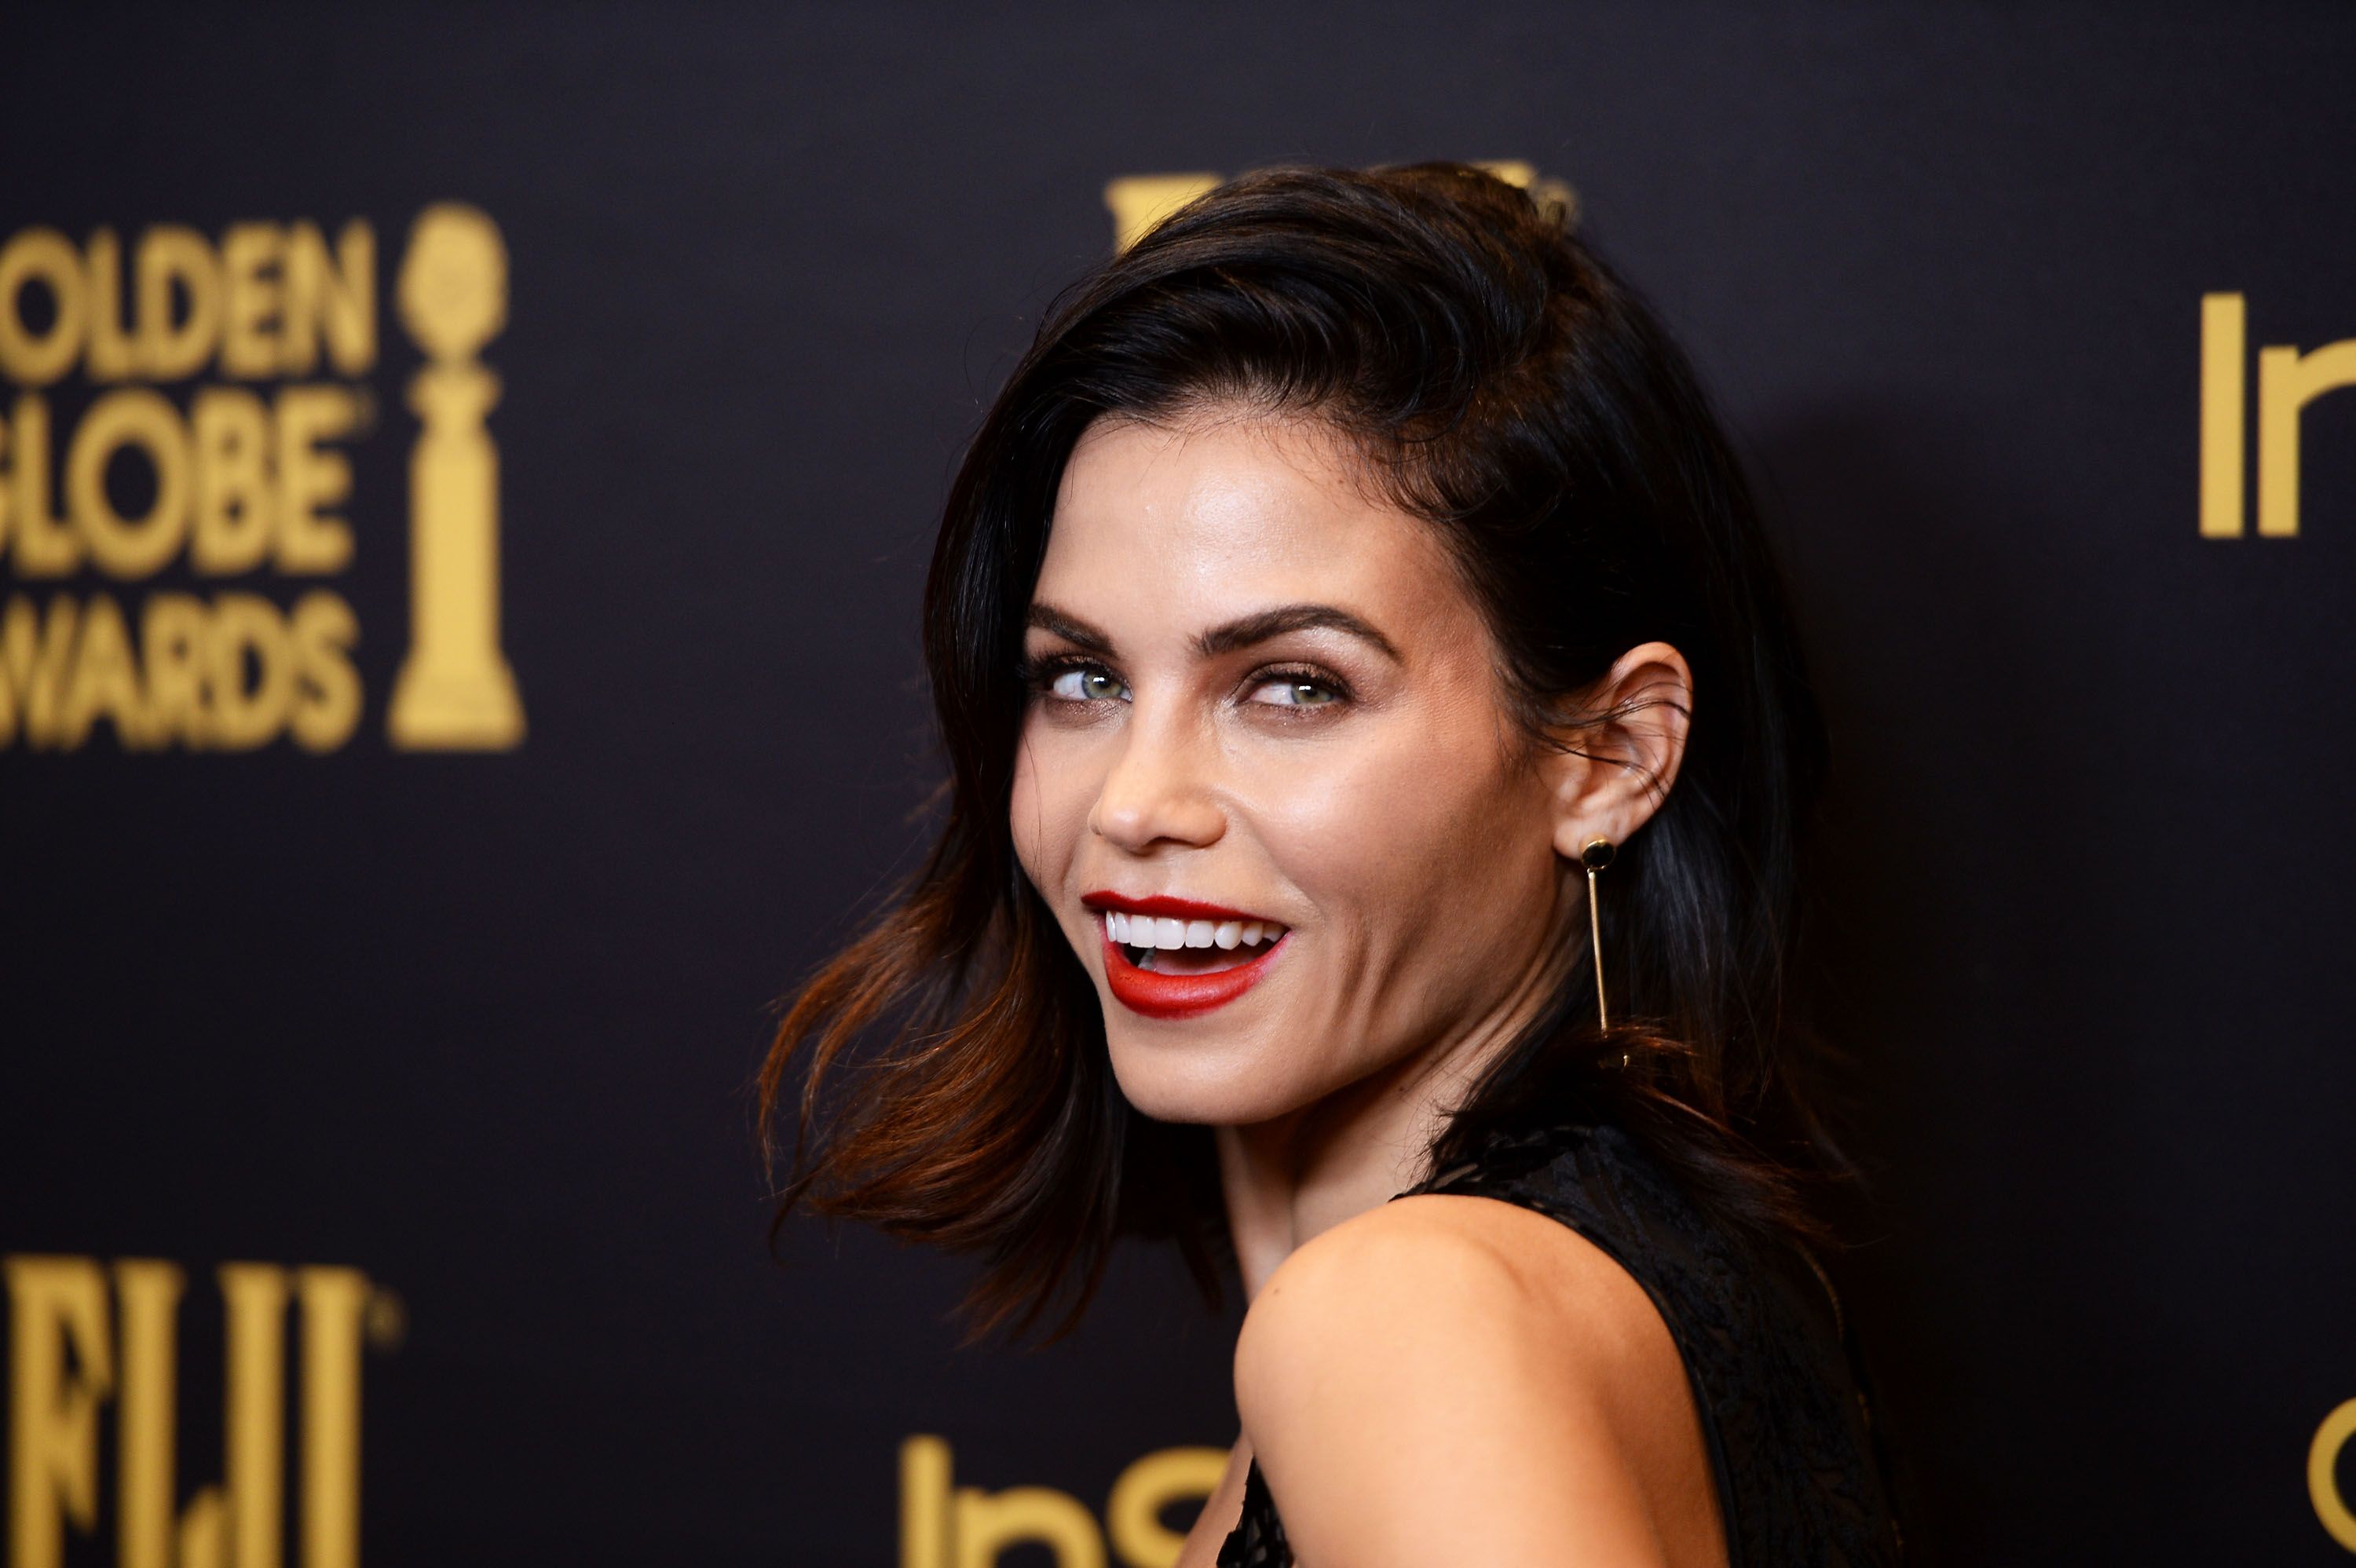 Jenna Dewan Tatum arrives at the Hollywood Foreign Press Association and InStyle celebrate the 2017 Golden Globe Award Season at Catch LA on November 10, 2016 in West Hollywood, California | Photo: Getty Images